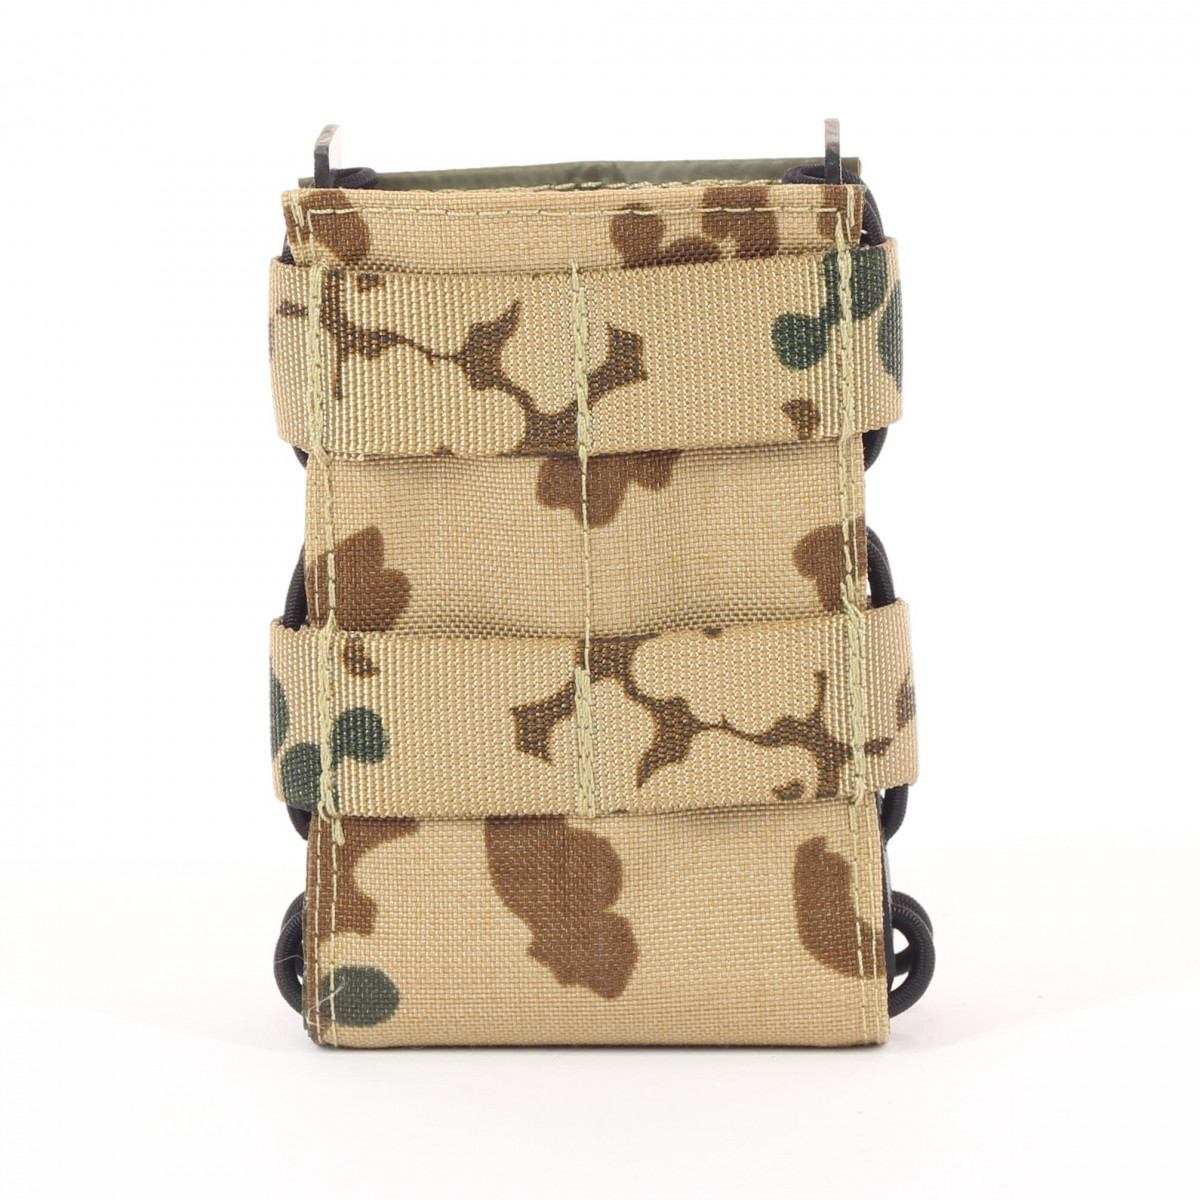 Quick-draw magazine pouch G36 short G3 in tropical camouflage